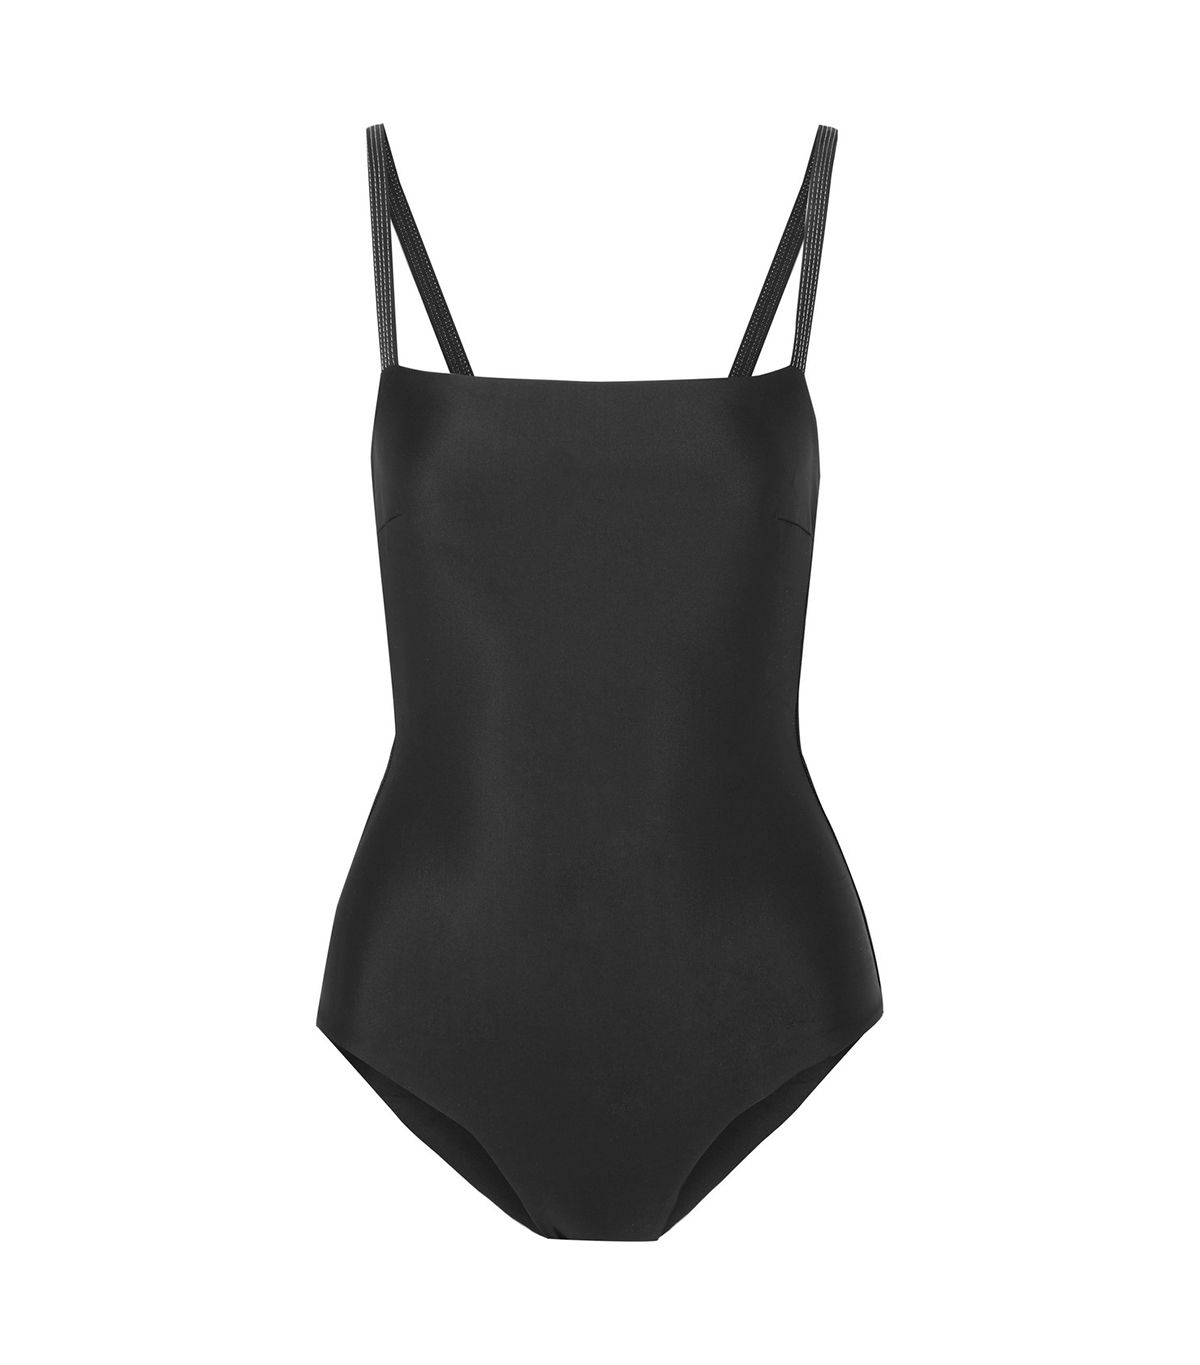 How 5 Women Wear the Same One-Size-Fits-All Swimsuit | Who What Wear